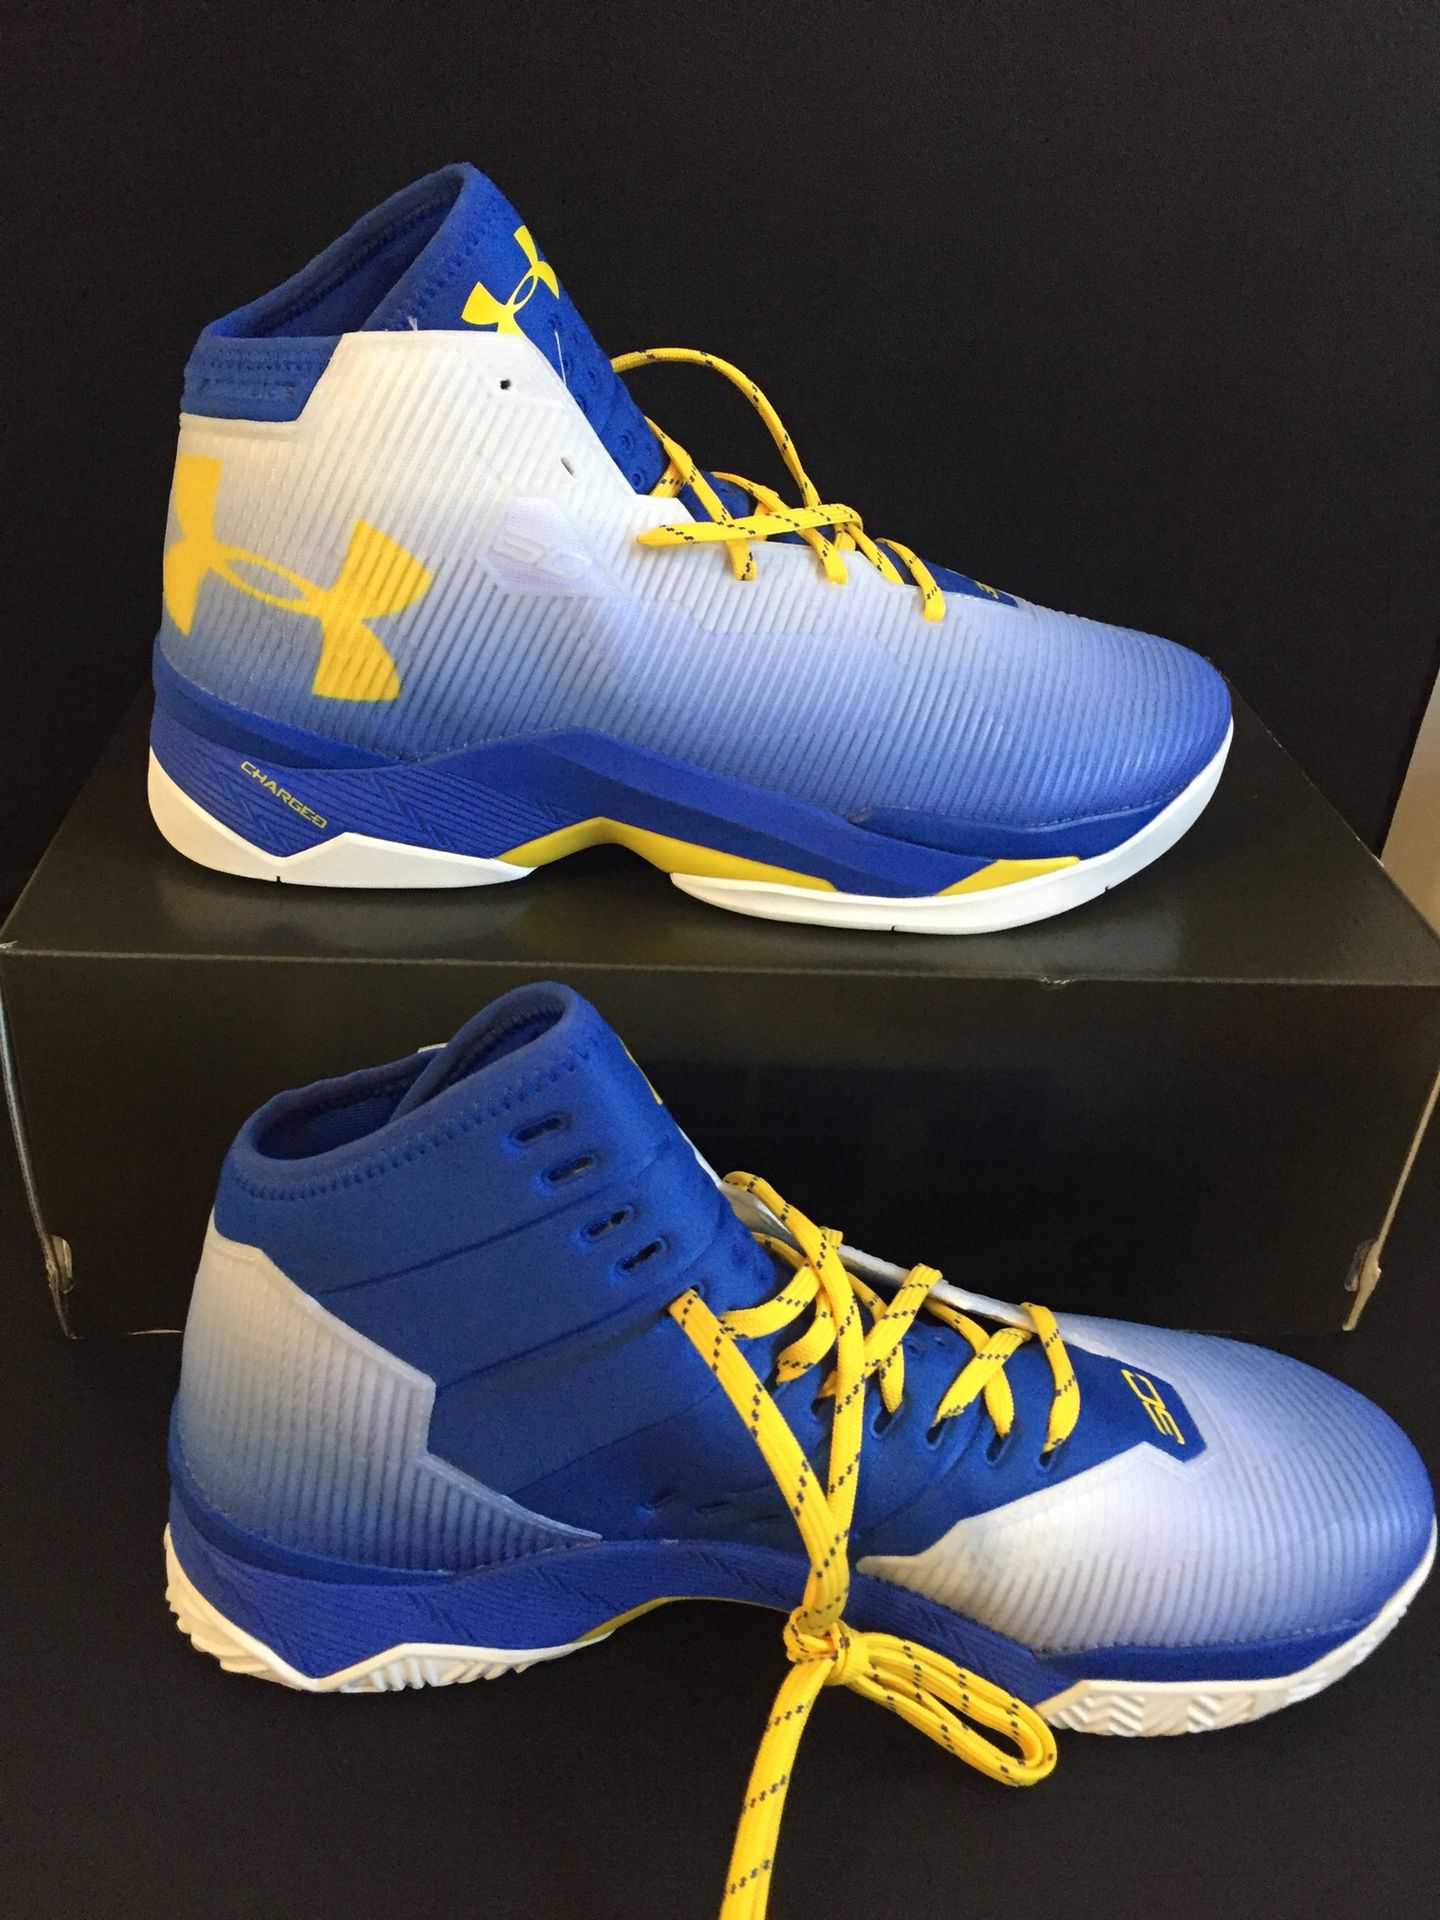 Curry 2